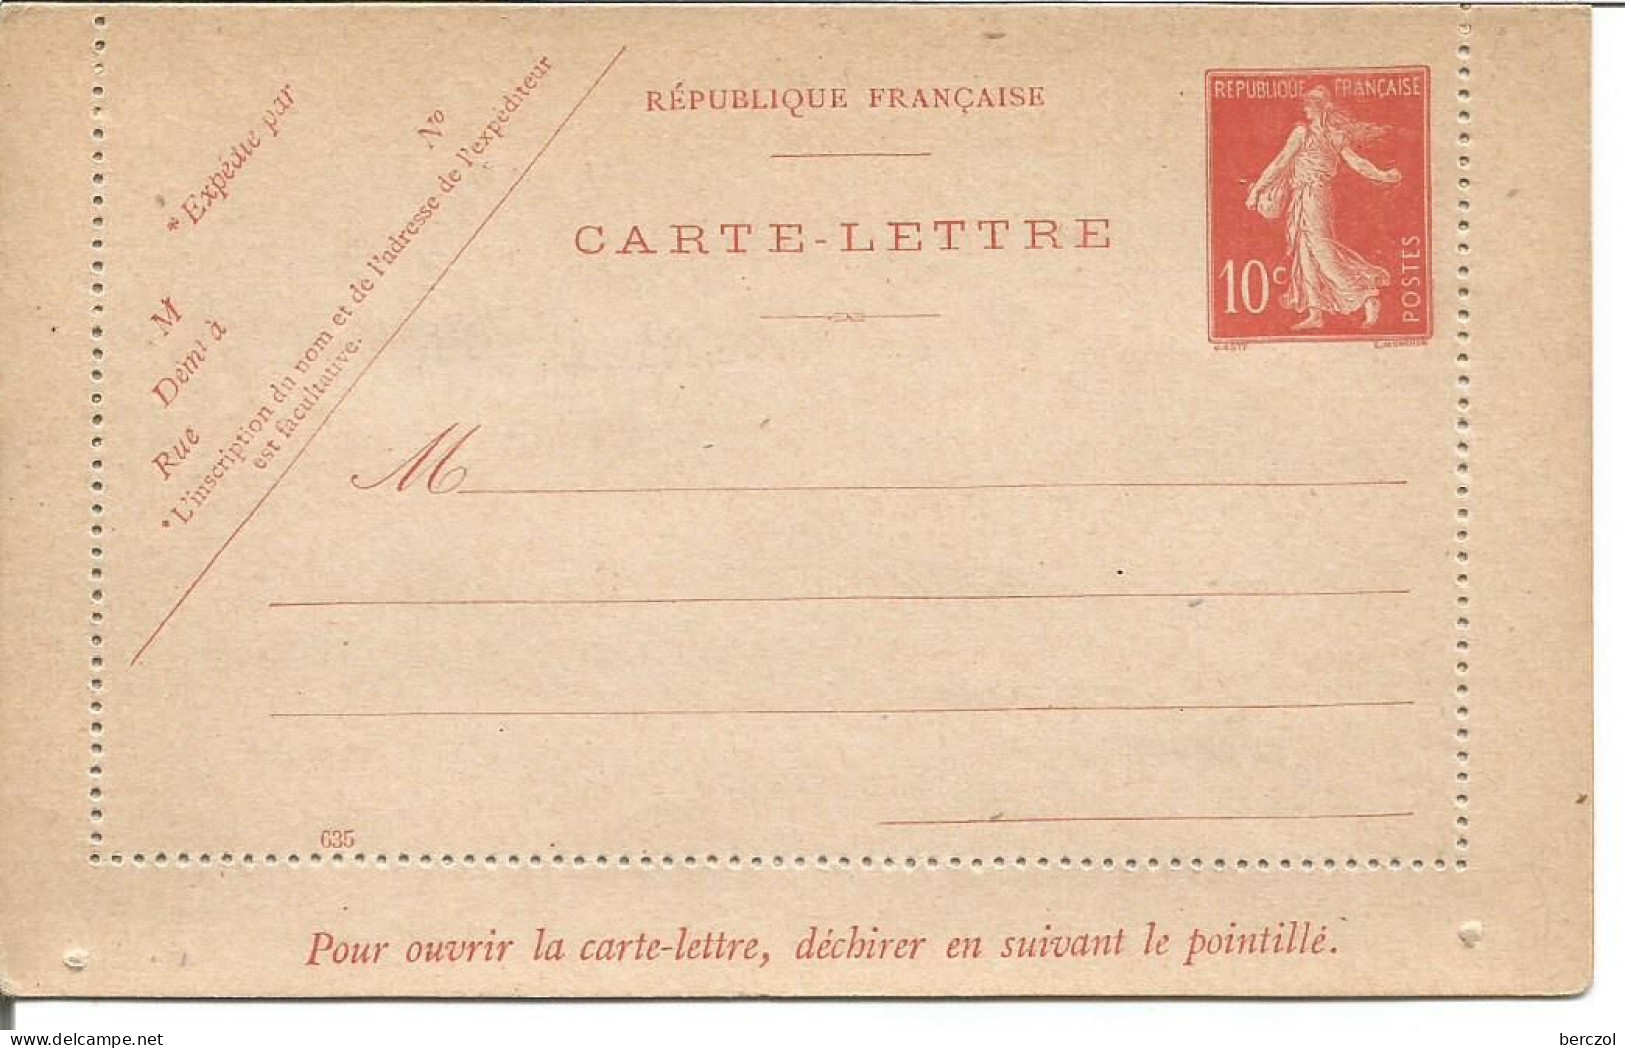 FRANCE ANNEE1906 ENTIERS TYPE SEMEUSE FOND PLEIN A INSCRIPTIONS MAIGRES N° 135 CL2 DATE 635 NEUF** TB COTE 18,00 €  - Cartes-lettres